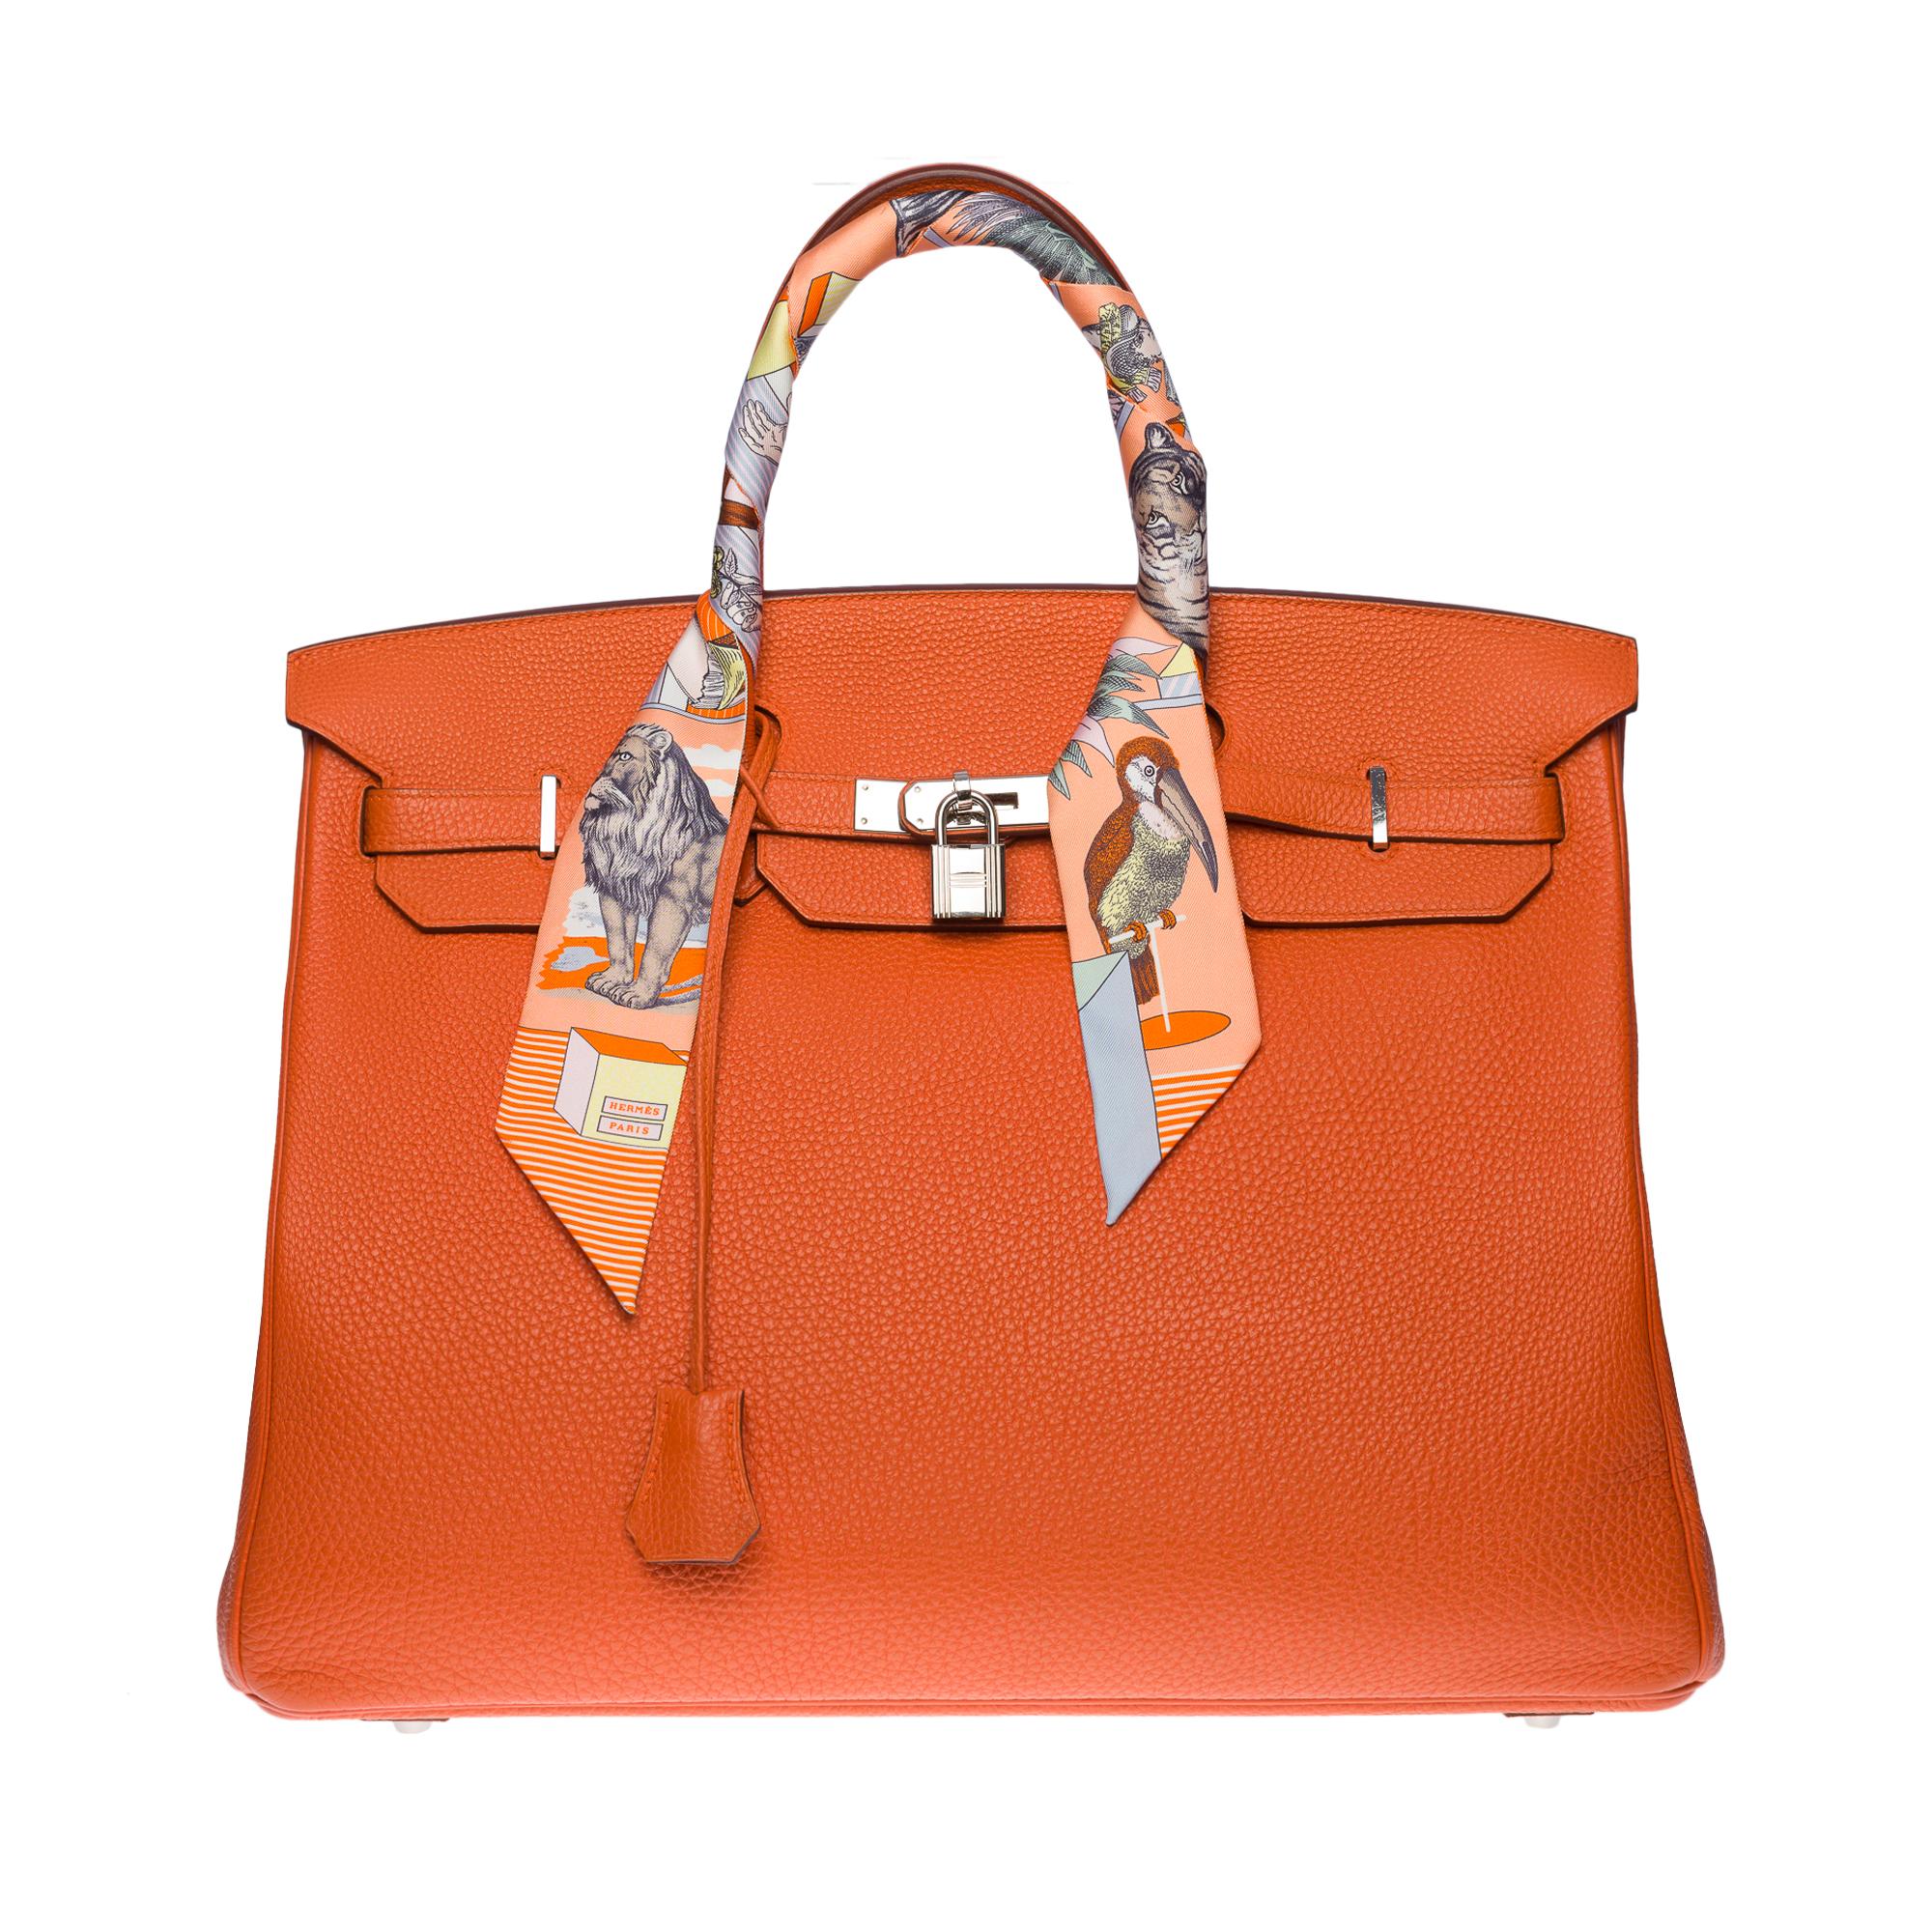 Beautiful Hermes Birkin 40 handbag in Orange Terre battue Togo leather , palladium silver metal hardware, double handle in orange leather allowing a hand-carried

Flap closure
Orange leather lining, one zippered pocket, one patch pocket
Signature: